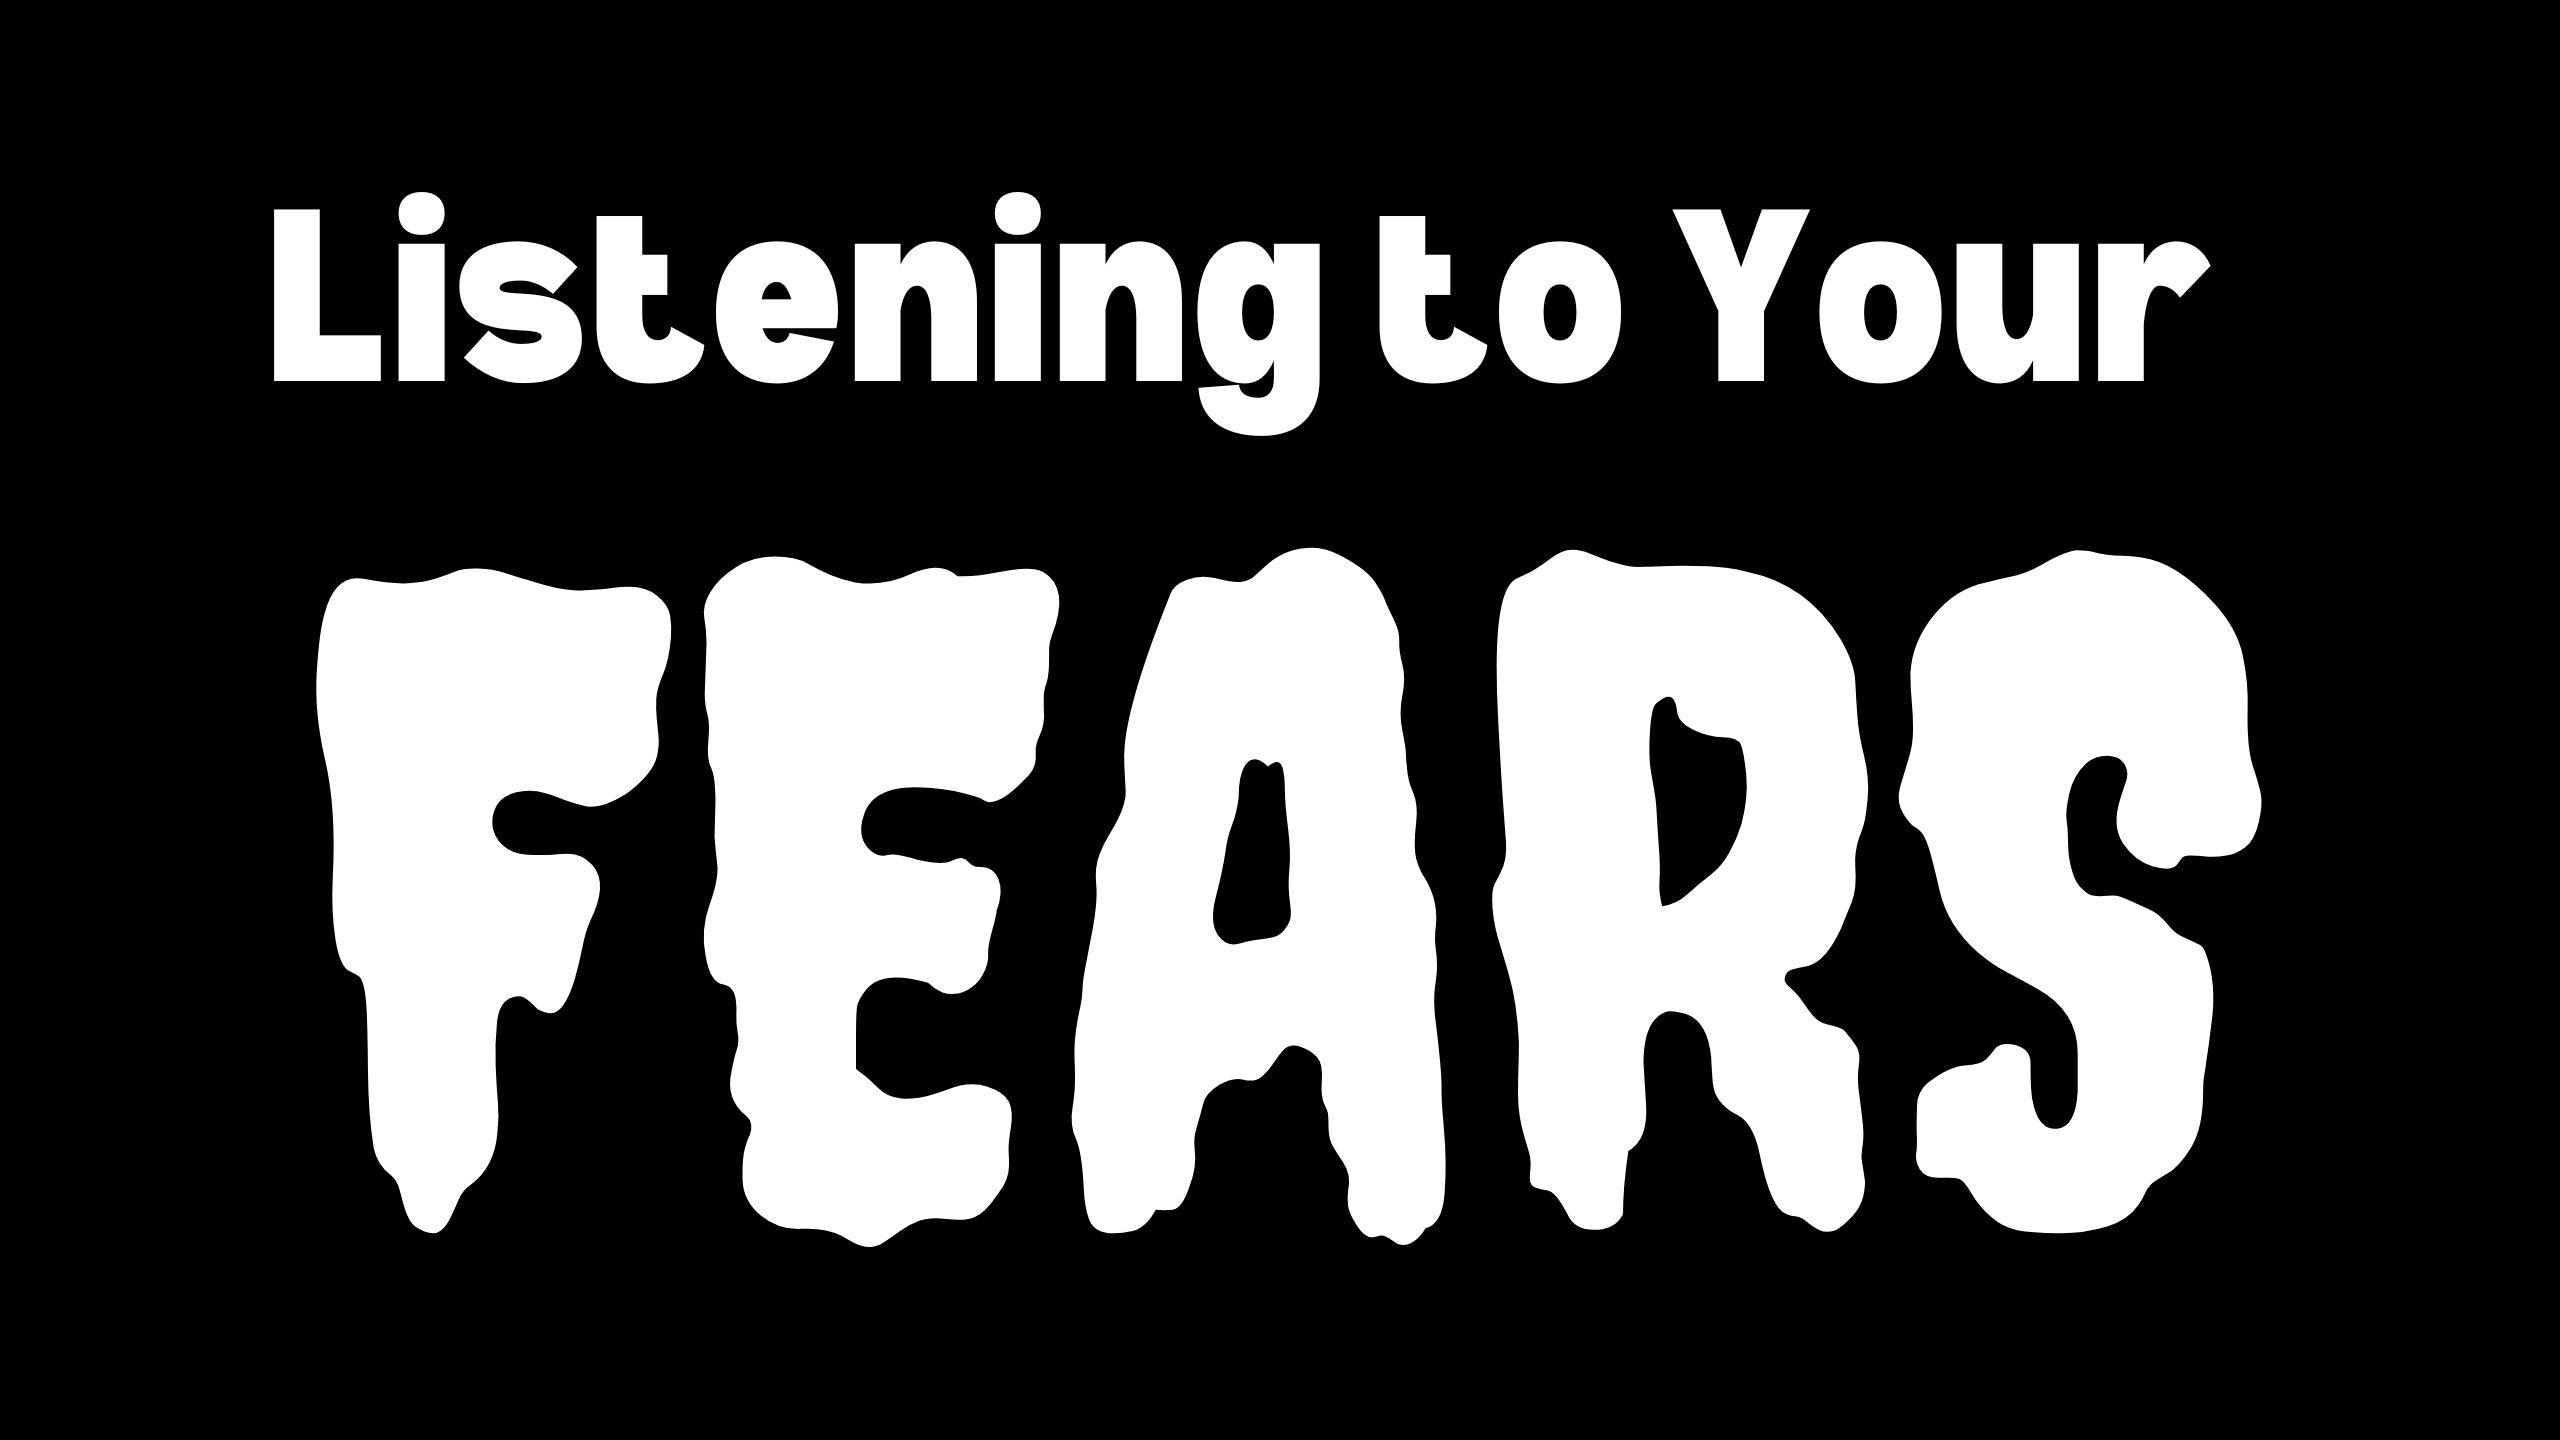 Listening to Your Fears